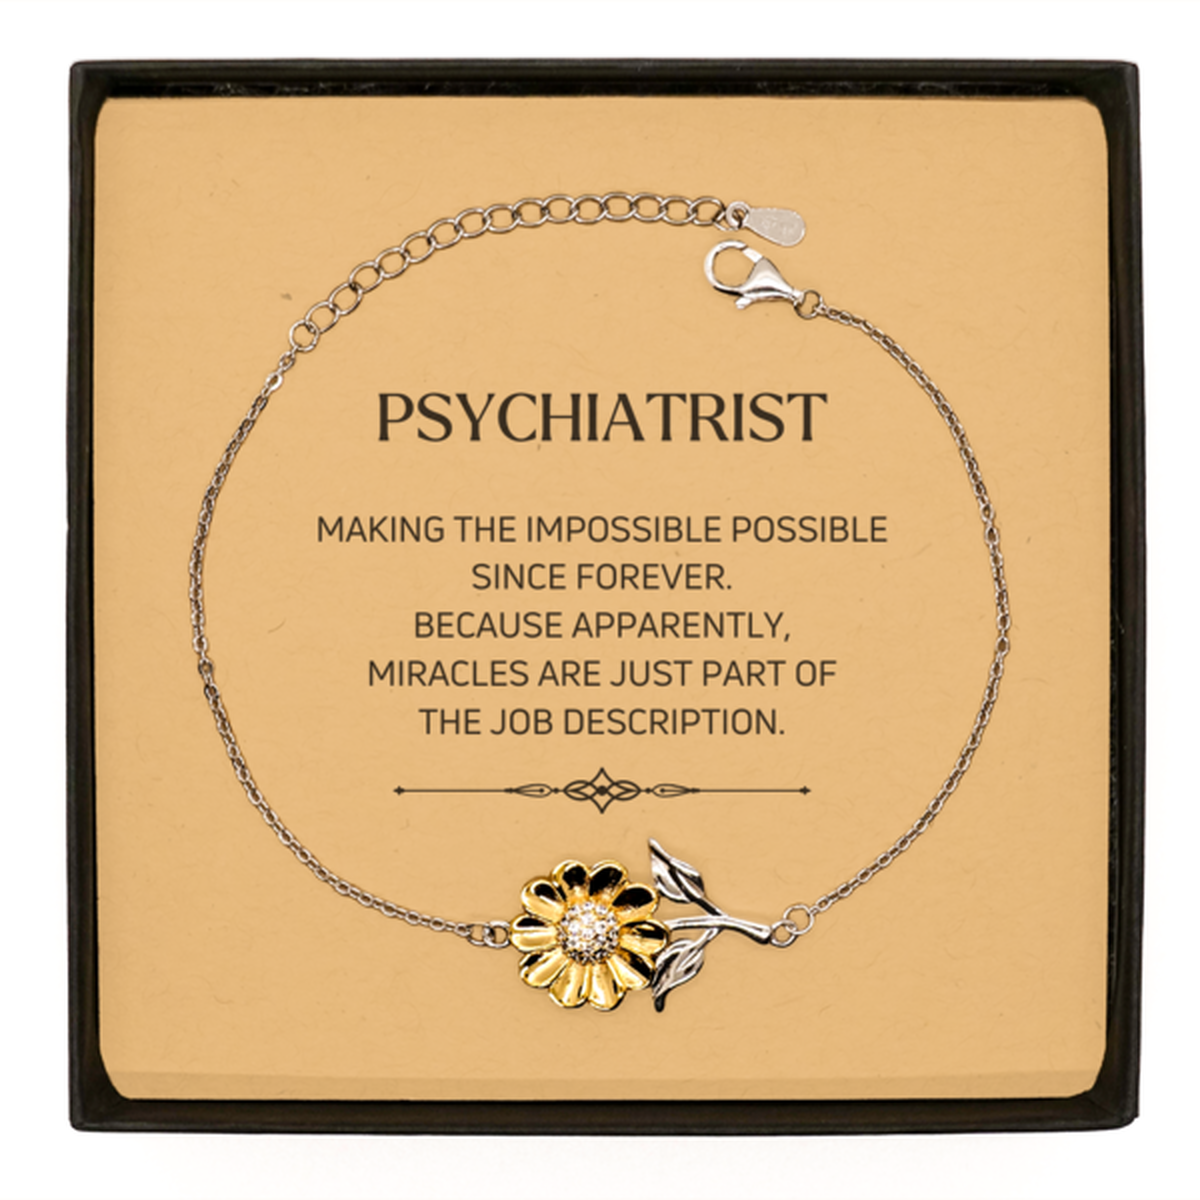 Funny Psychiatrist Gifts, Miracles are just part of the job description, Inspirational Birthday Sunflower Bracelet For Psychiatrist, Men, Women, Coworkers, Friends, Boss